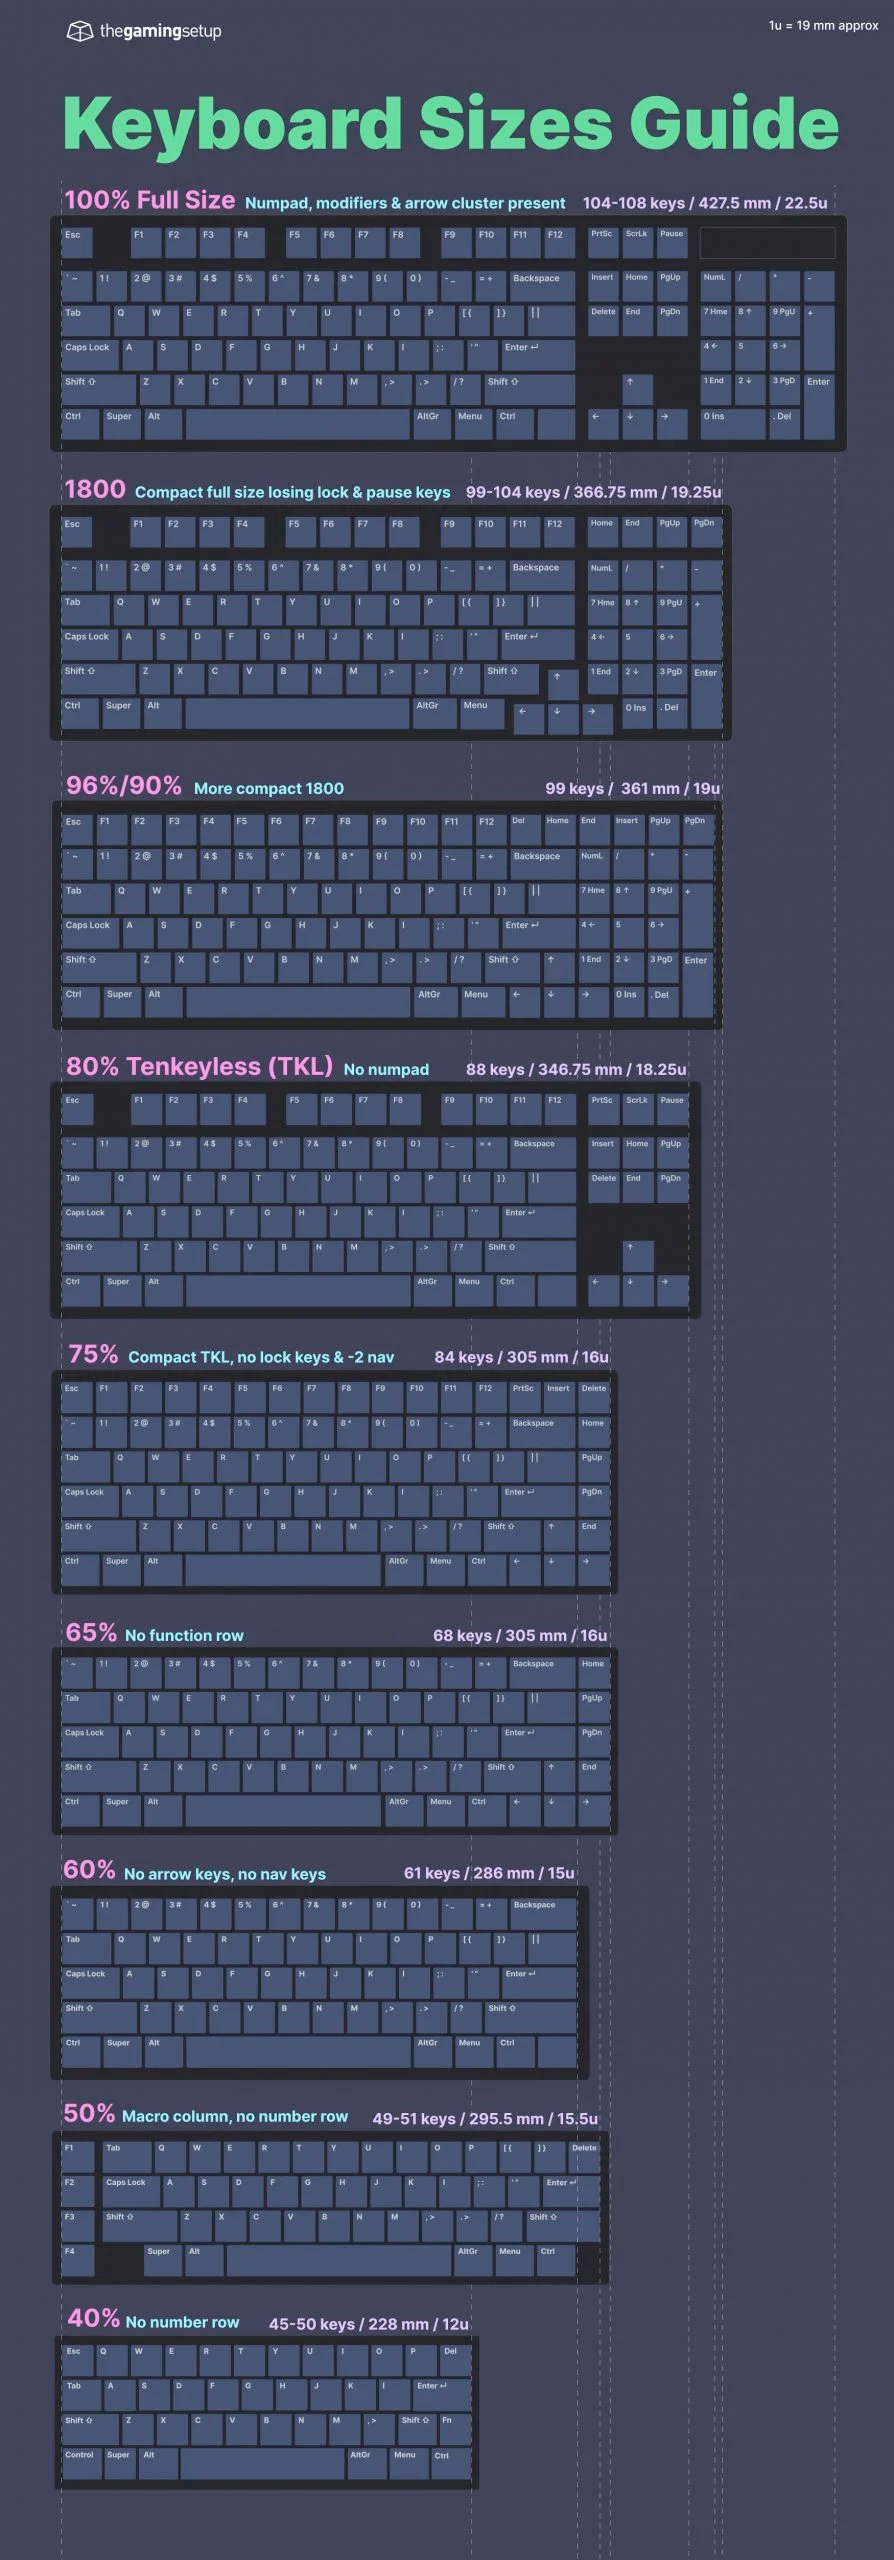 What Makes the US ANSI Keyboard Is the Best Layout for Developers ?